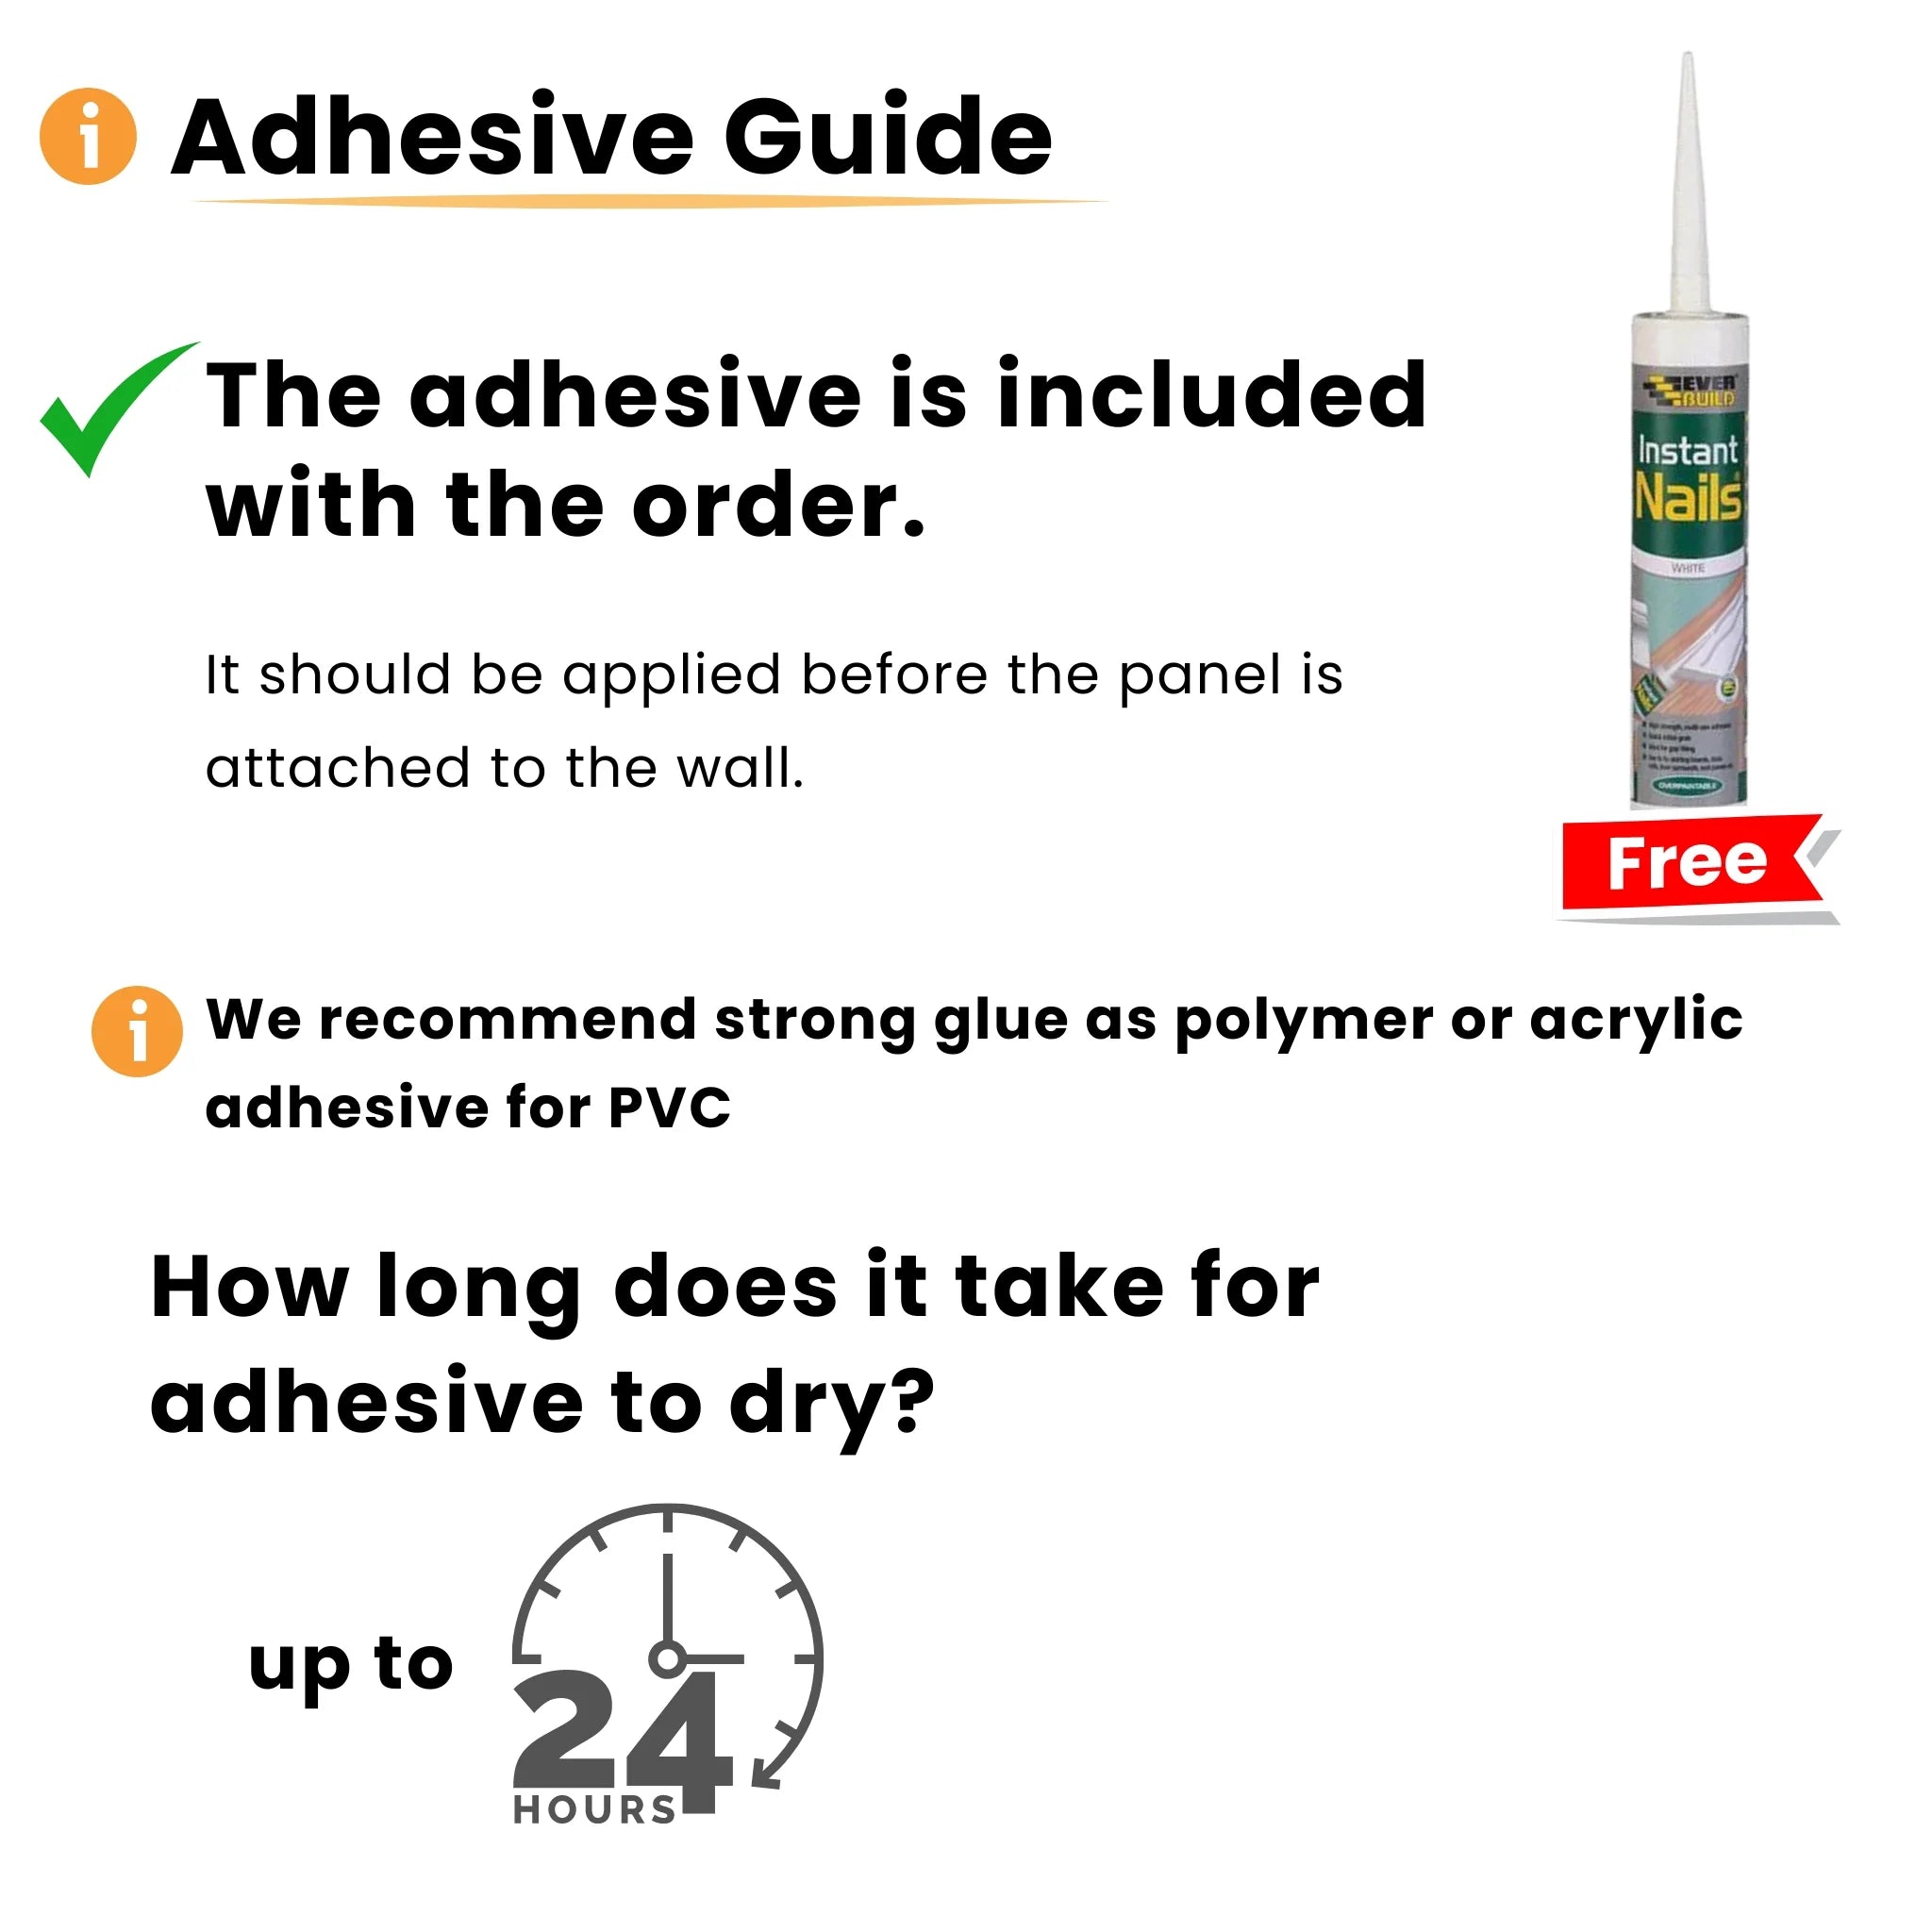 Adhesive guide for PVC wall panels, polymer or acrylic glue recommended